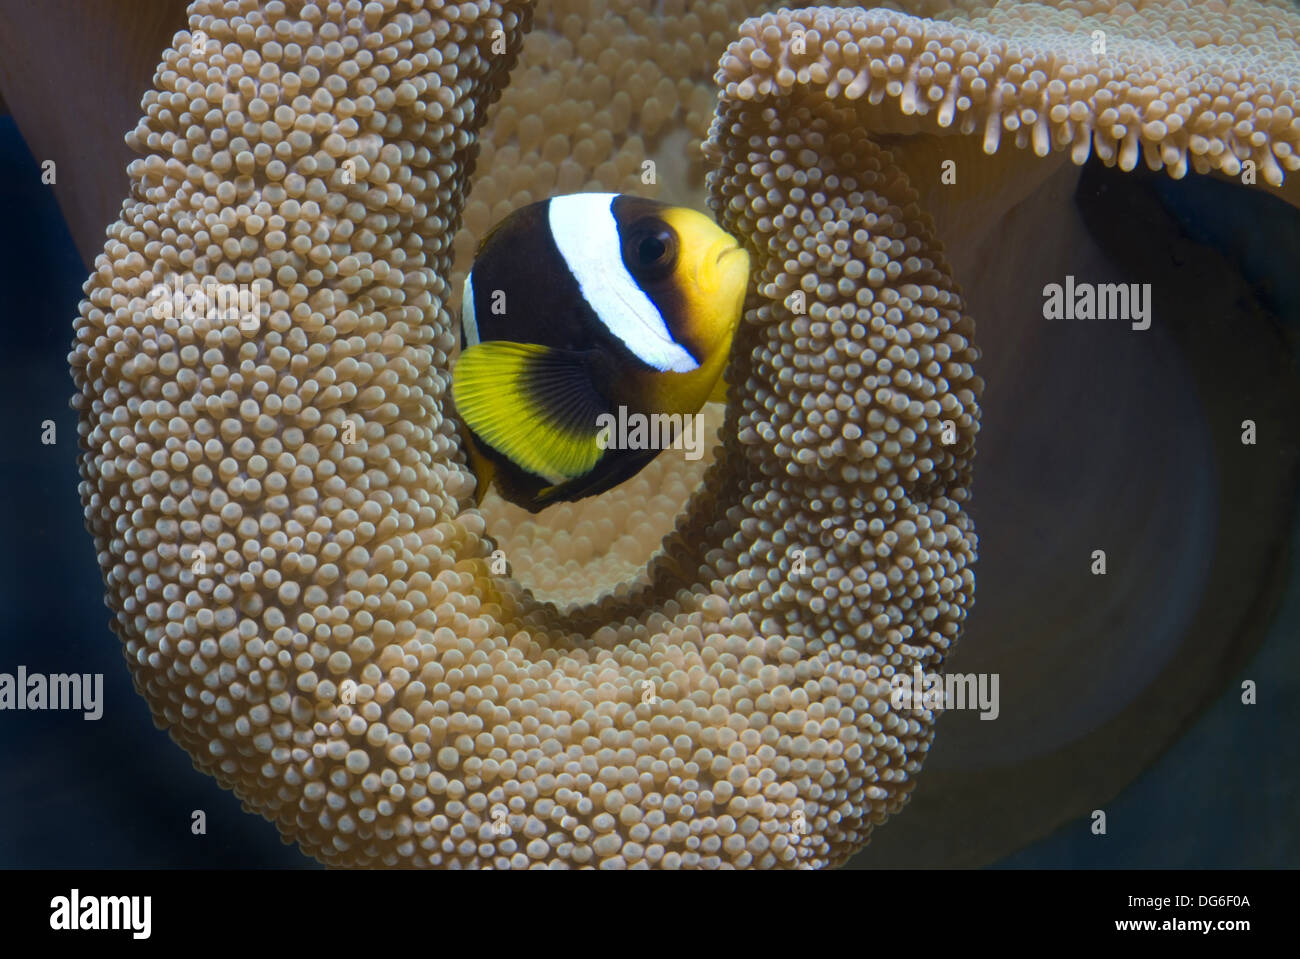 Maurizio, anemonefish amphiprion chrysogaster Foto Stock